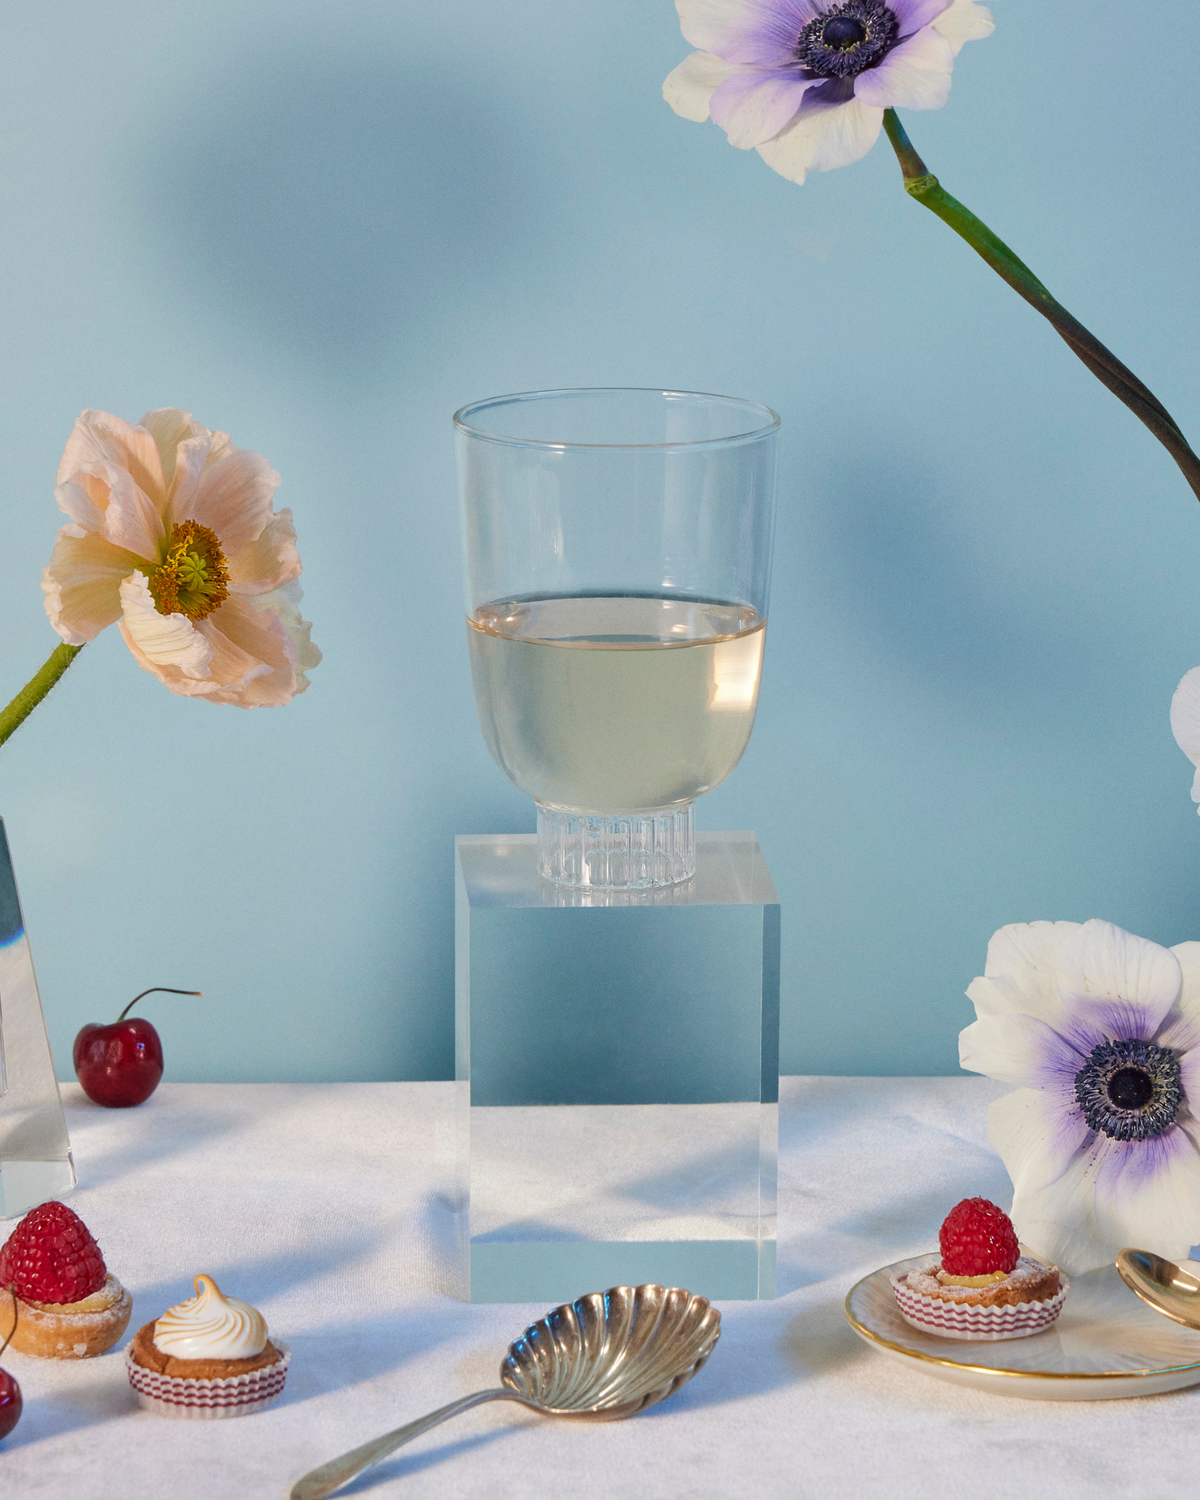 Sprezz romantic clear stemless wine glass on a table with poppies and anemones flowers, cherries, raspberry tarts, rose strawberries, and grapes. Made of 100% borosilicate which makes them lightweight yet durable and dishwasher safe 